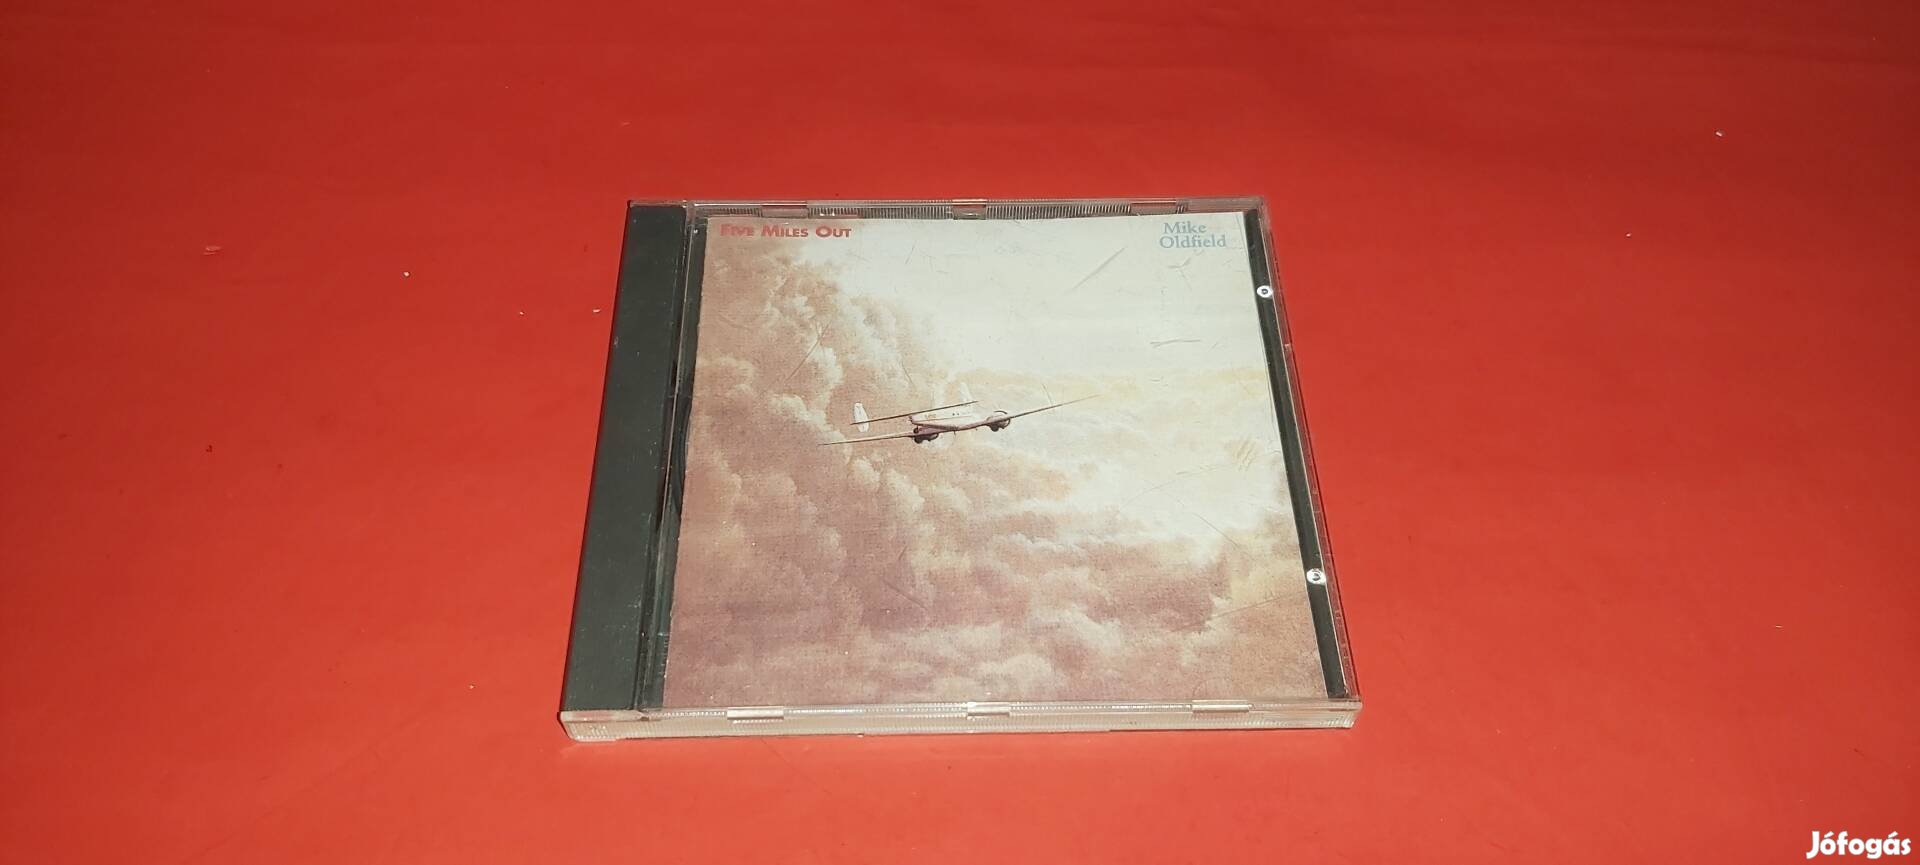 Mike Oldfield Five miles out Cd 